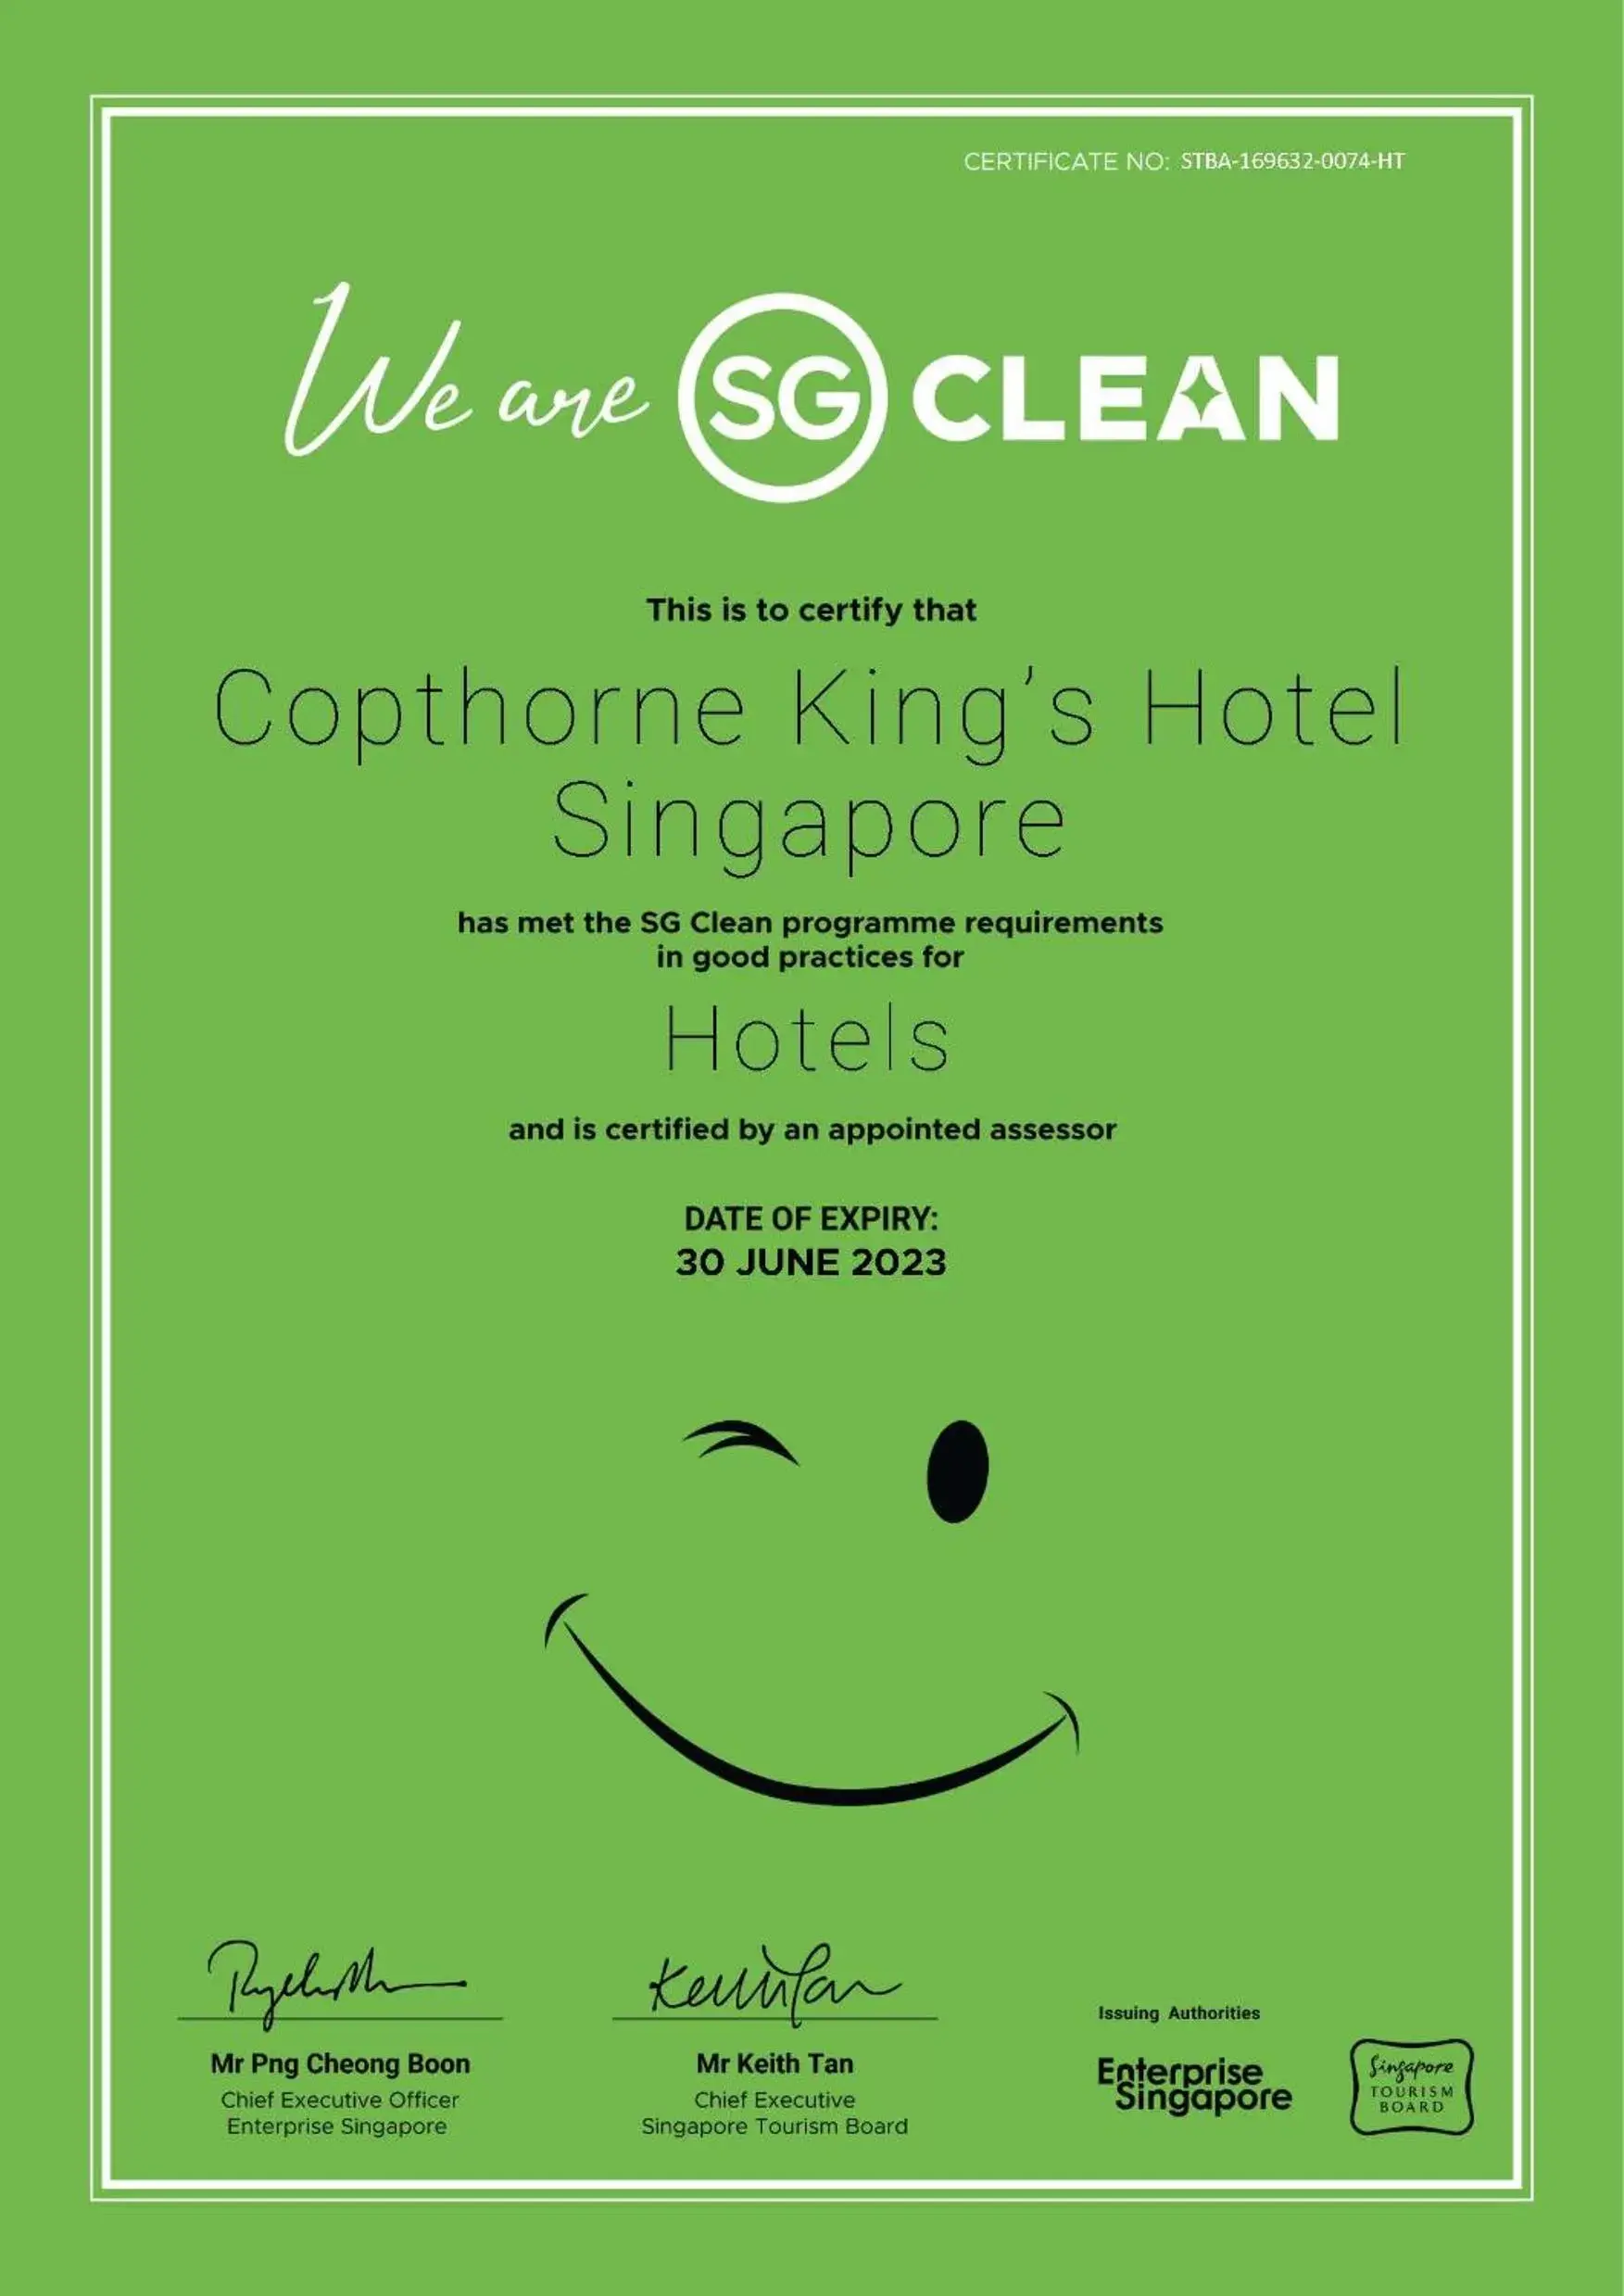 Logo/Certificate/Sign in Copthorne King's Hotel Singapore on Havelock